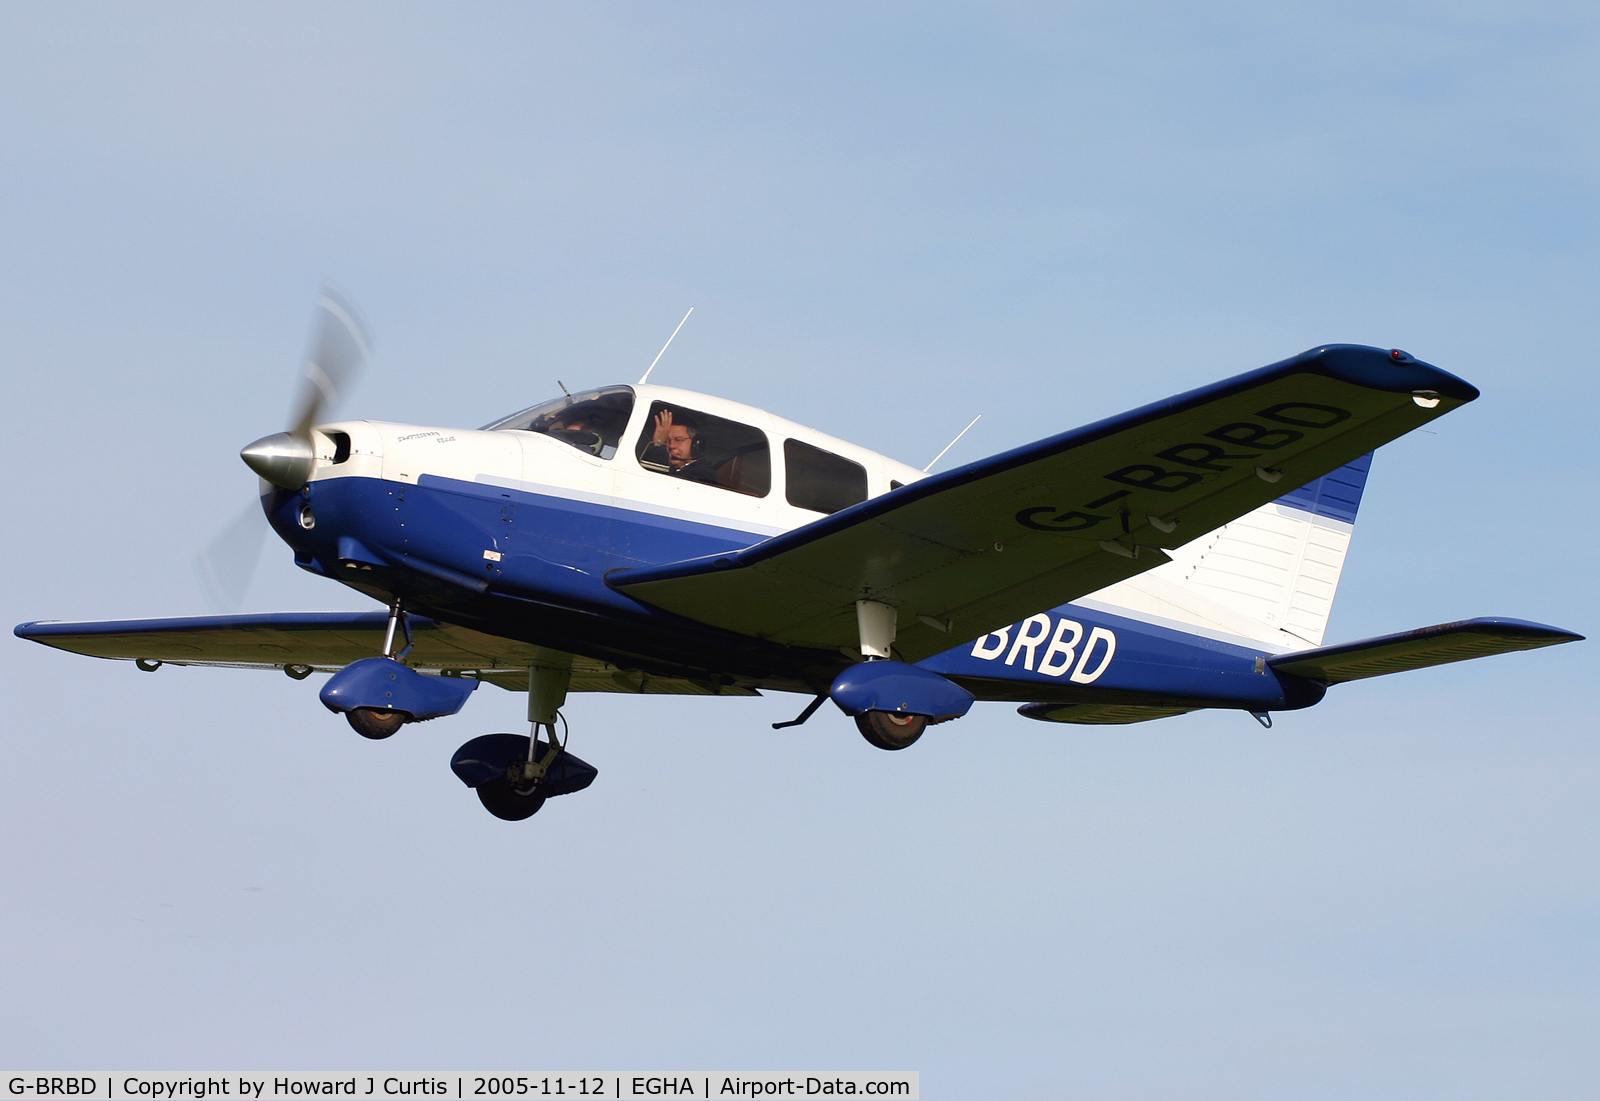 G-BRBD, 1974 Piper PA-28-151 Cherokee Warrior C/N 28-7415315, Privately owned